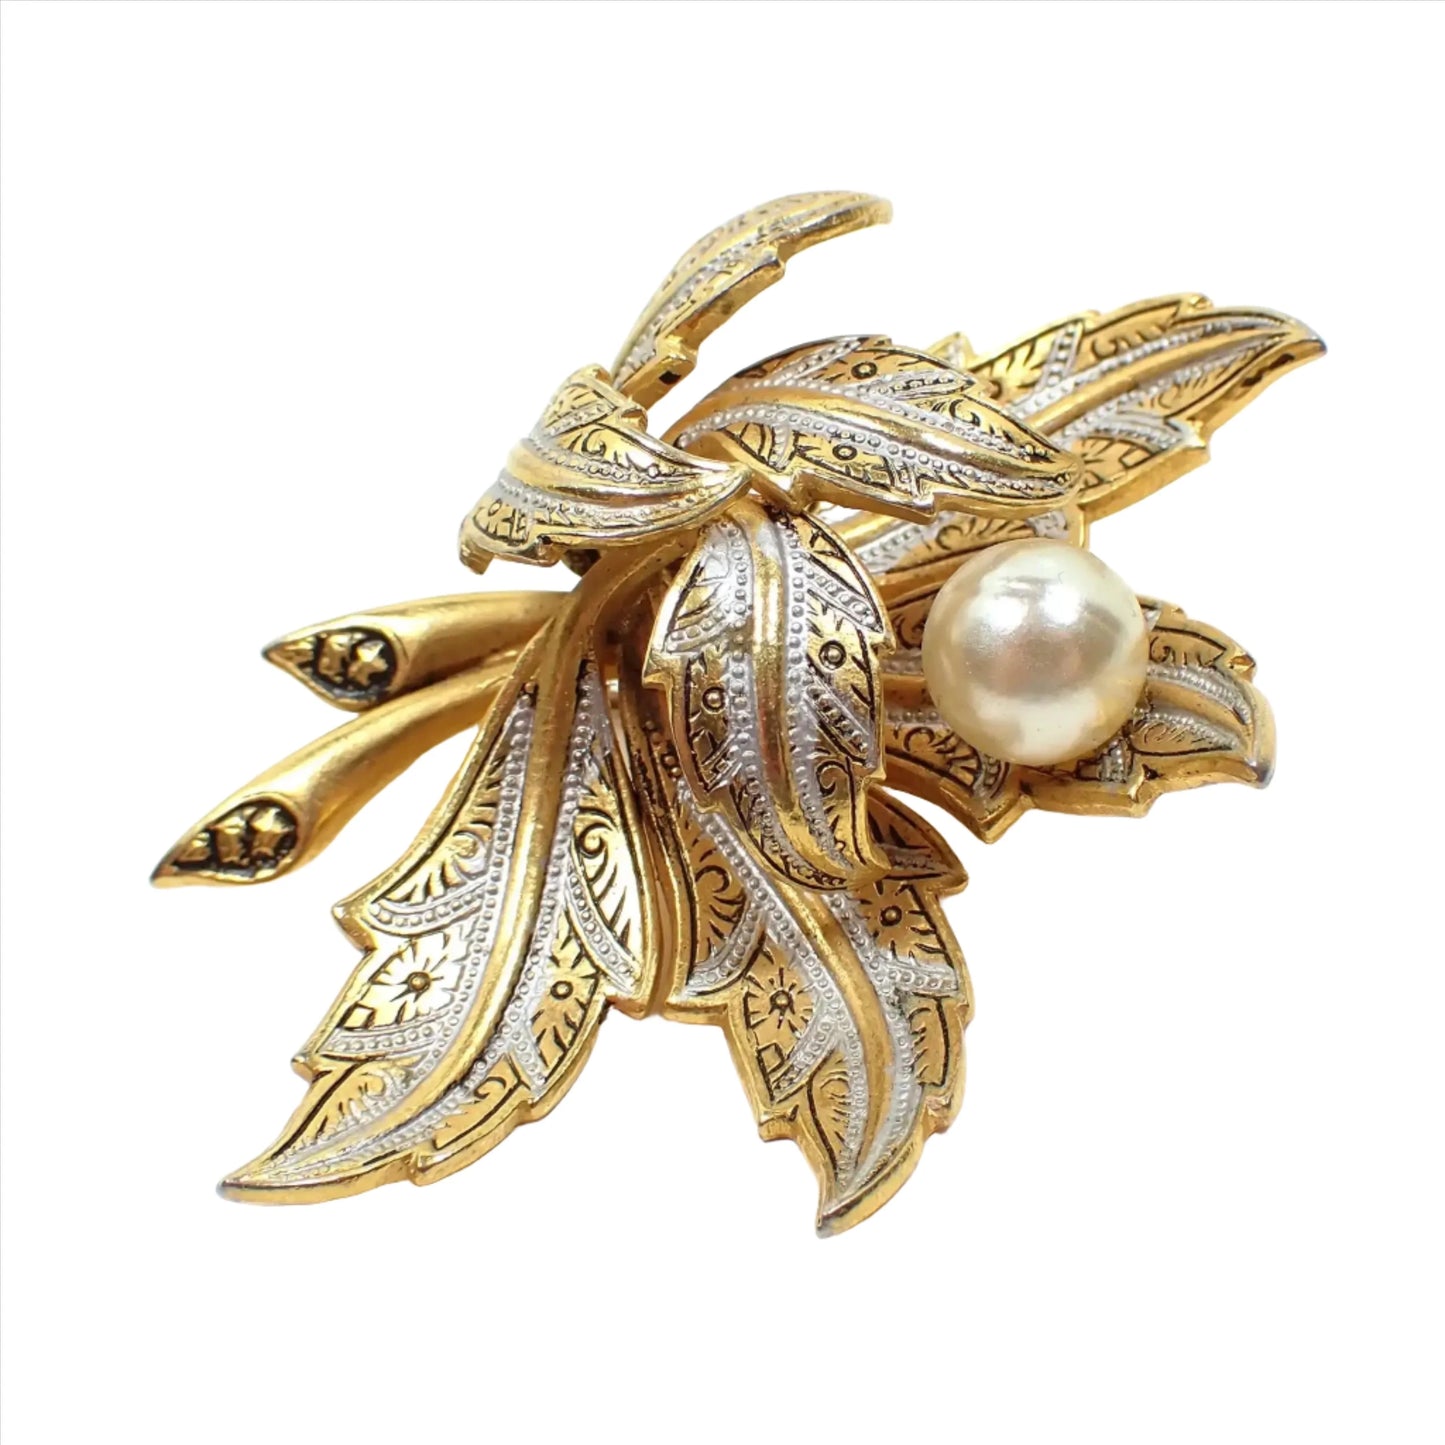 Enlarged view of the Mid Century vintage faux pearl Damascene brooch pin. The metal is mostly gold tone in color and has metallic silver and black painted design. There are numerous curled leaves and a plastic faux pearl on one of the leaves.